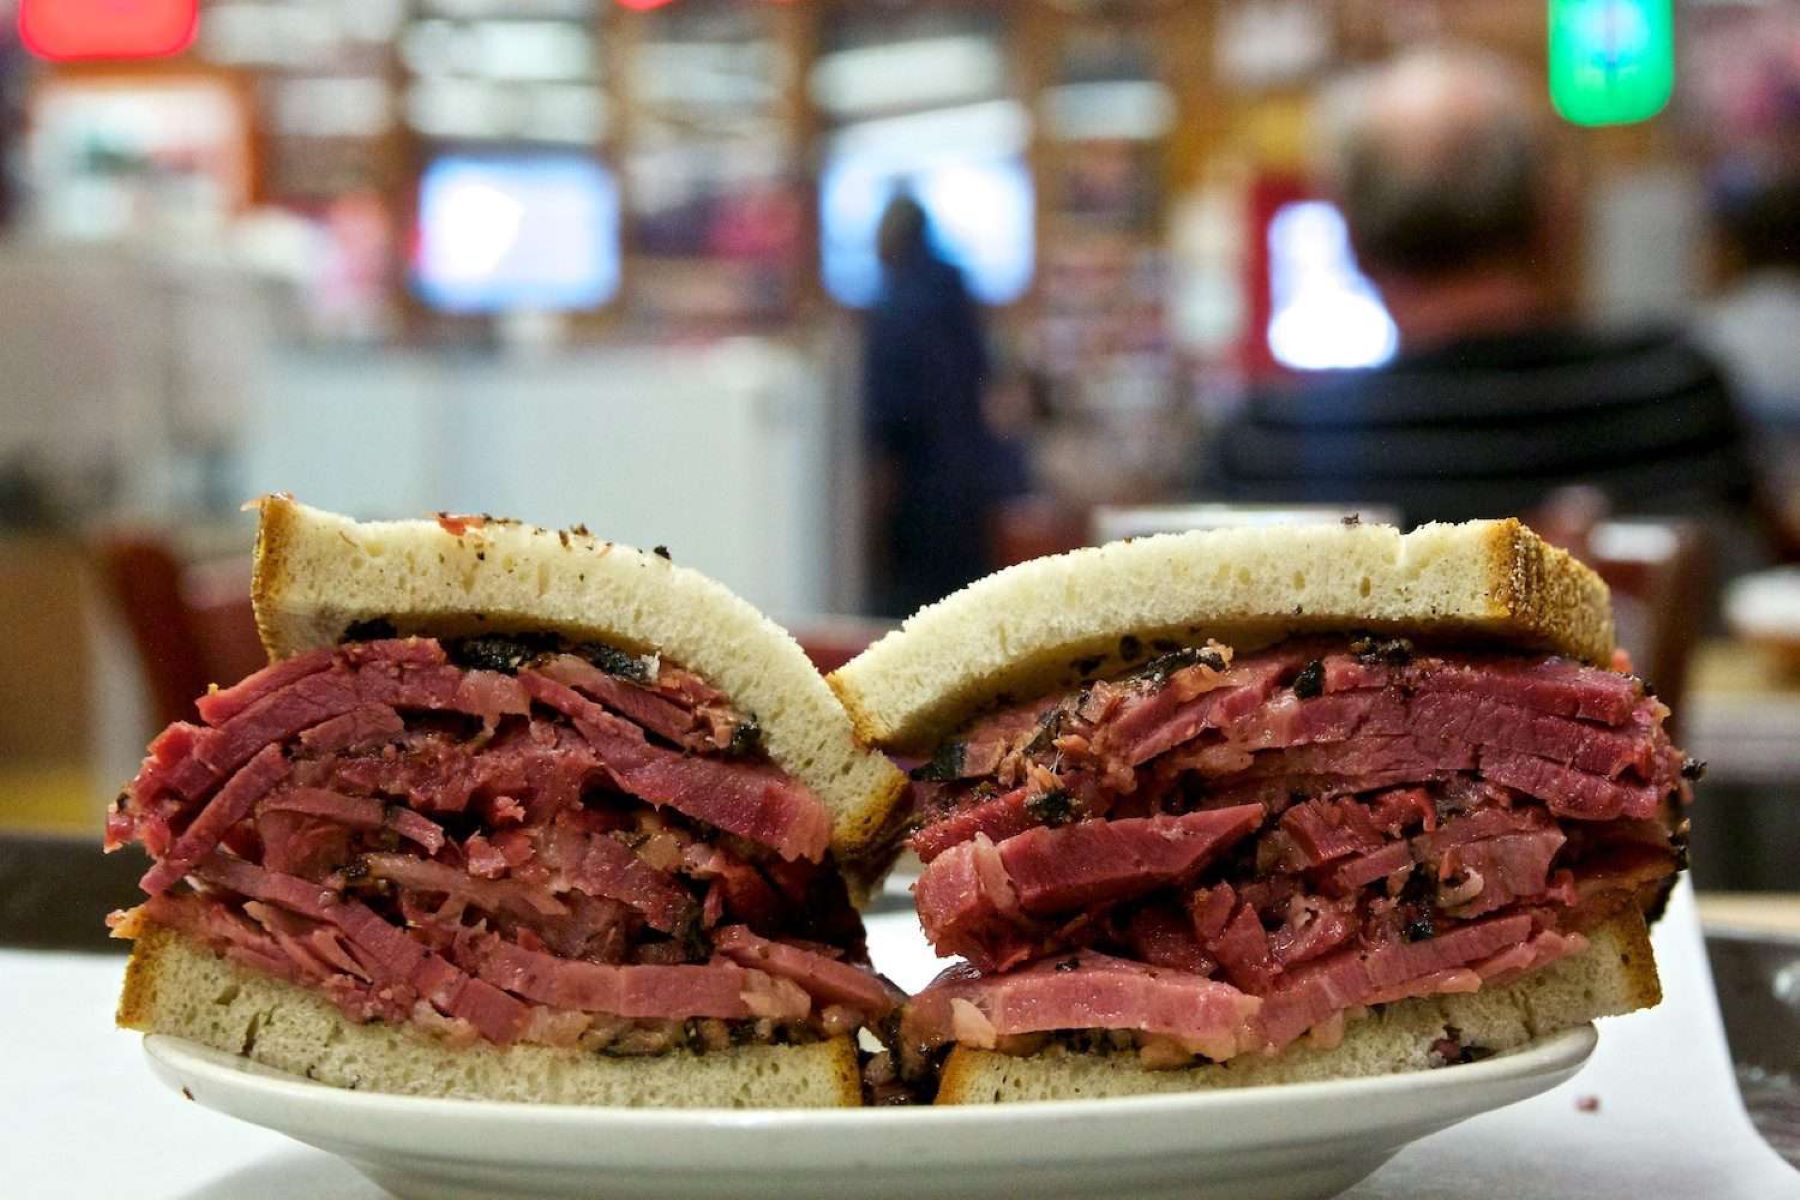 The Ultimate Guide To Different Deli Meats: Pastrami, Corned Beef, Roast Beef, And Smoked Meat Explained!